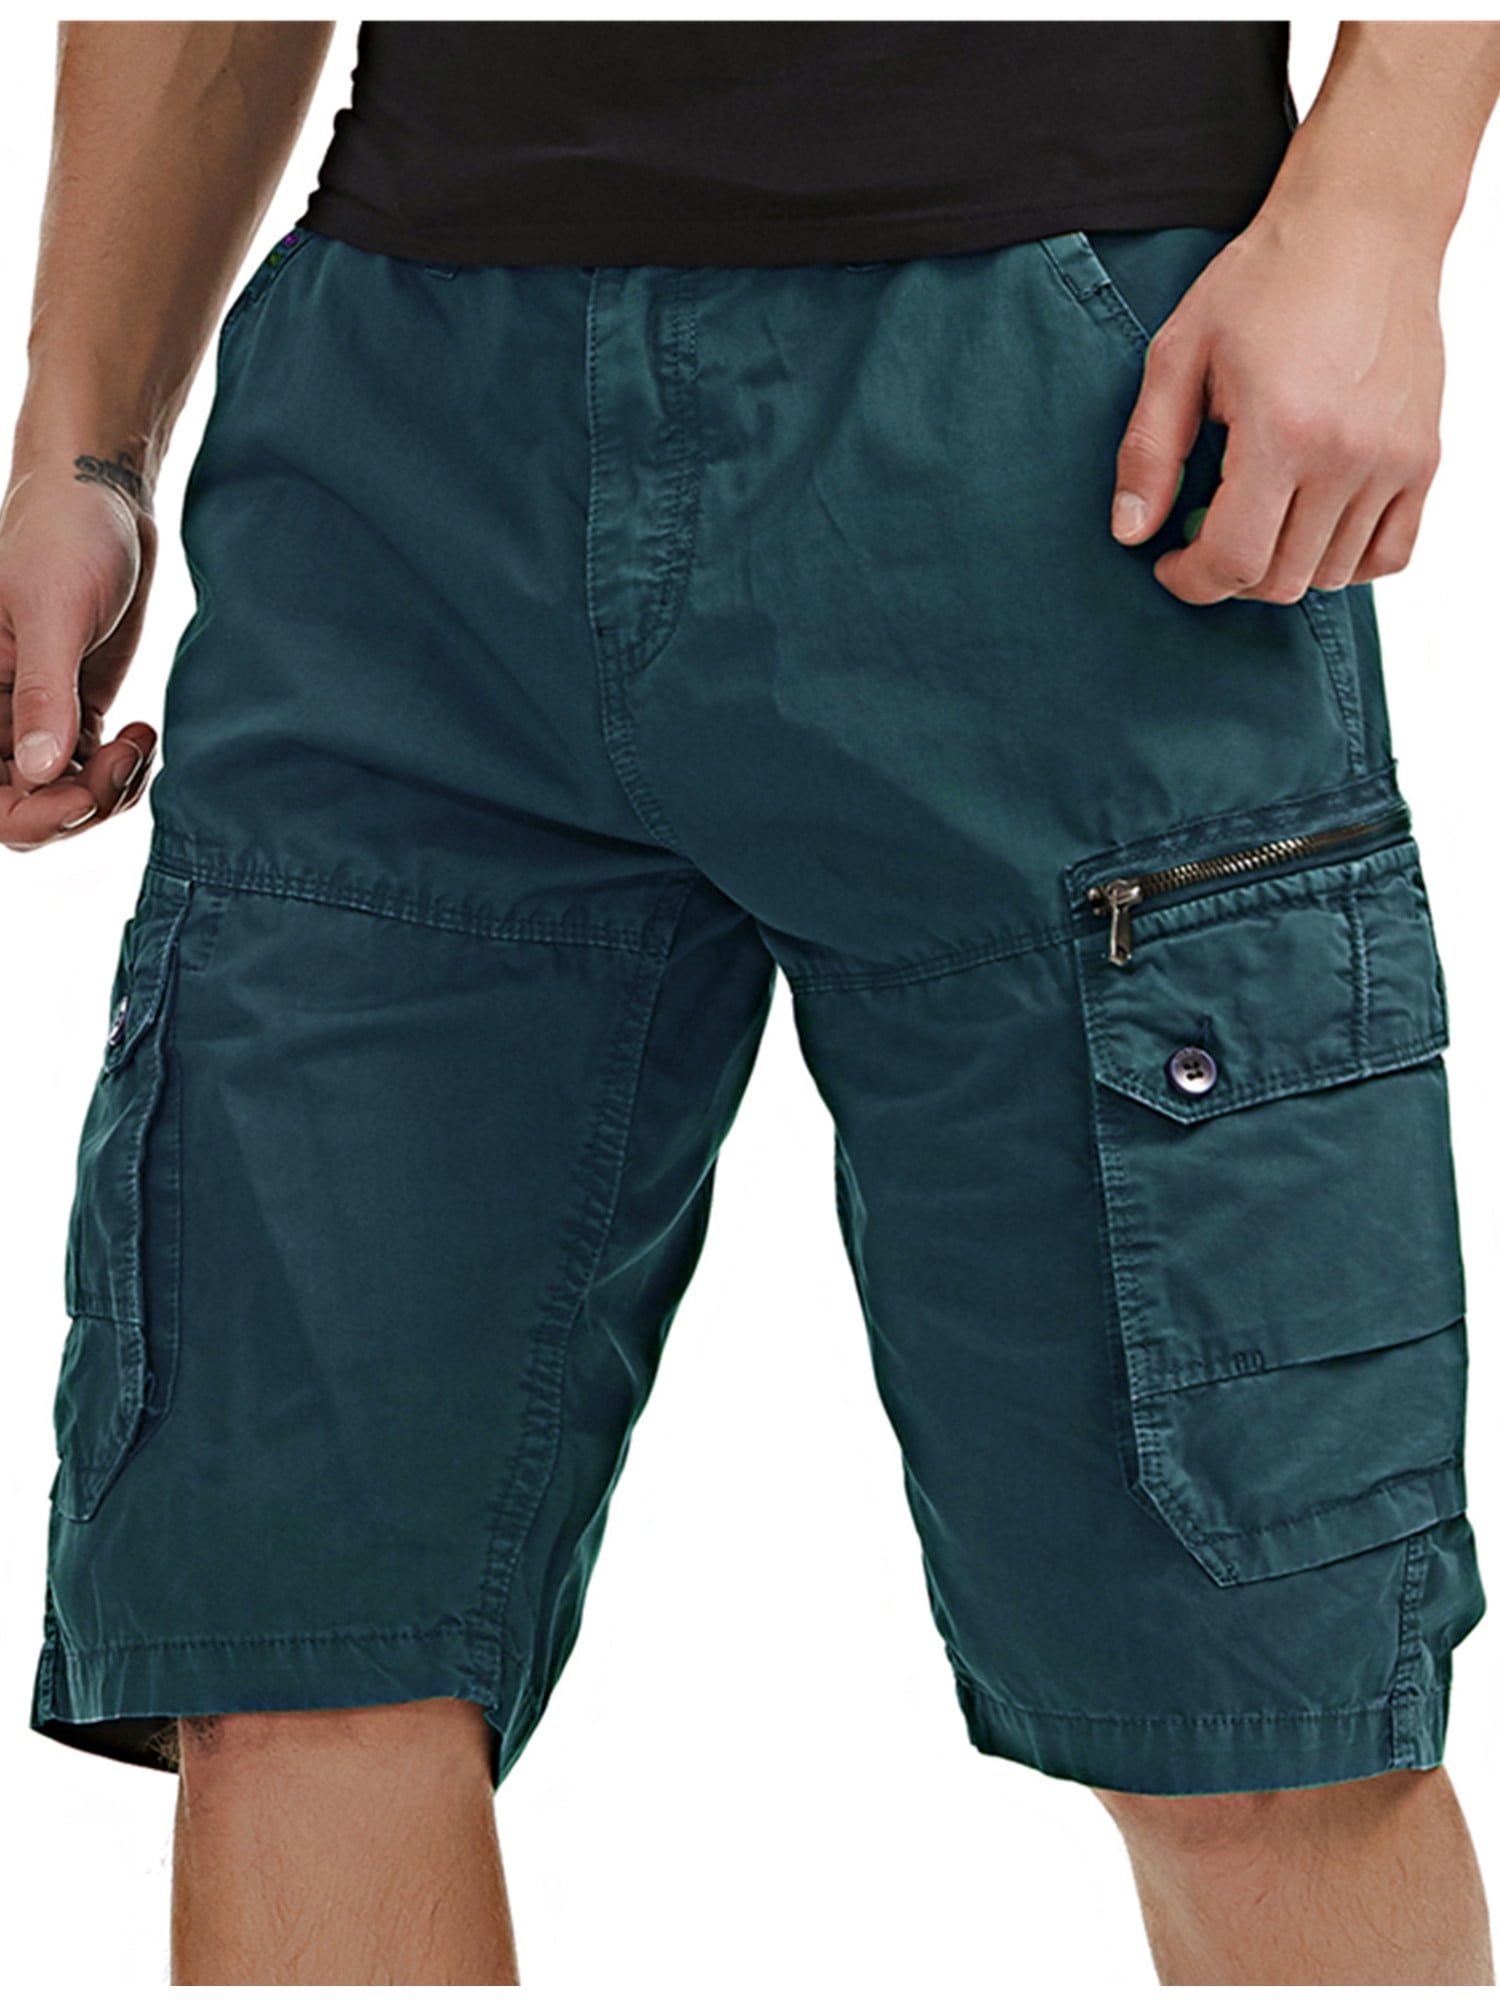 AKARMY Men's Lightweight Cargo Shorts Utility Work Short Outdoor Cotton Twill Shorts with 8 Pockets